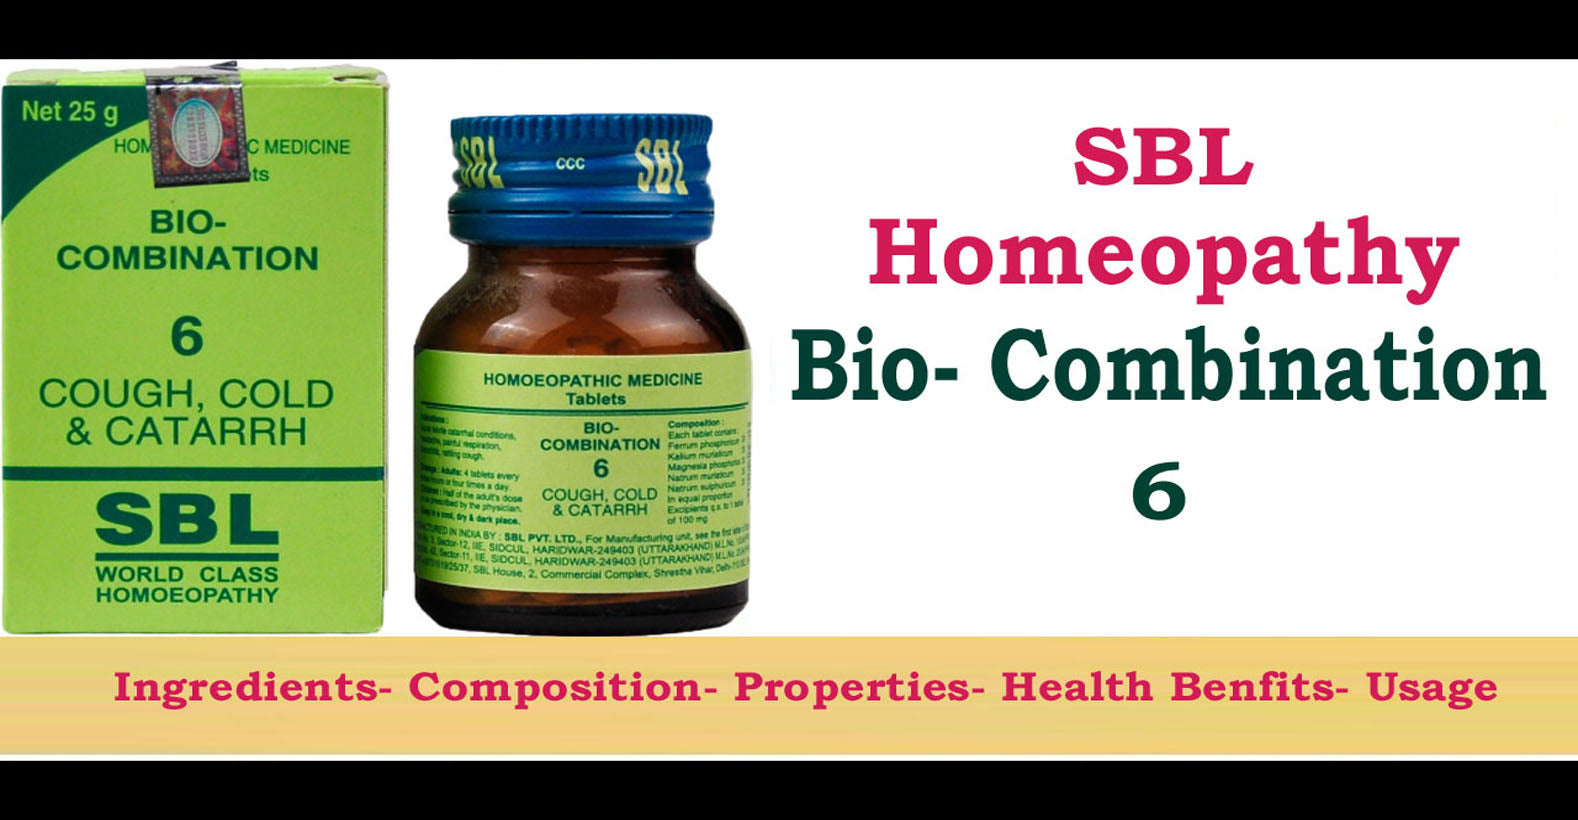 SBL Homeopathy Bio-Combination 6 Tablet -  Ingredients, Composition, Properties, Health Benefits, Usage